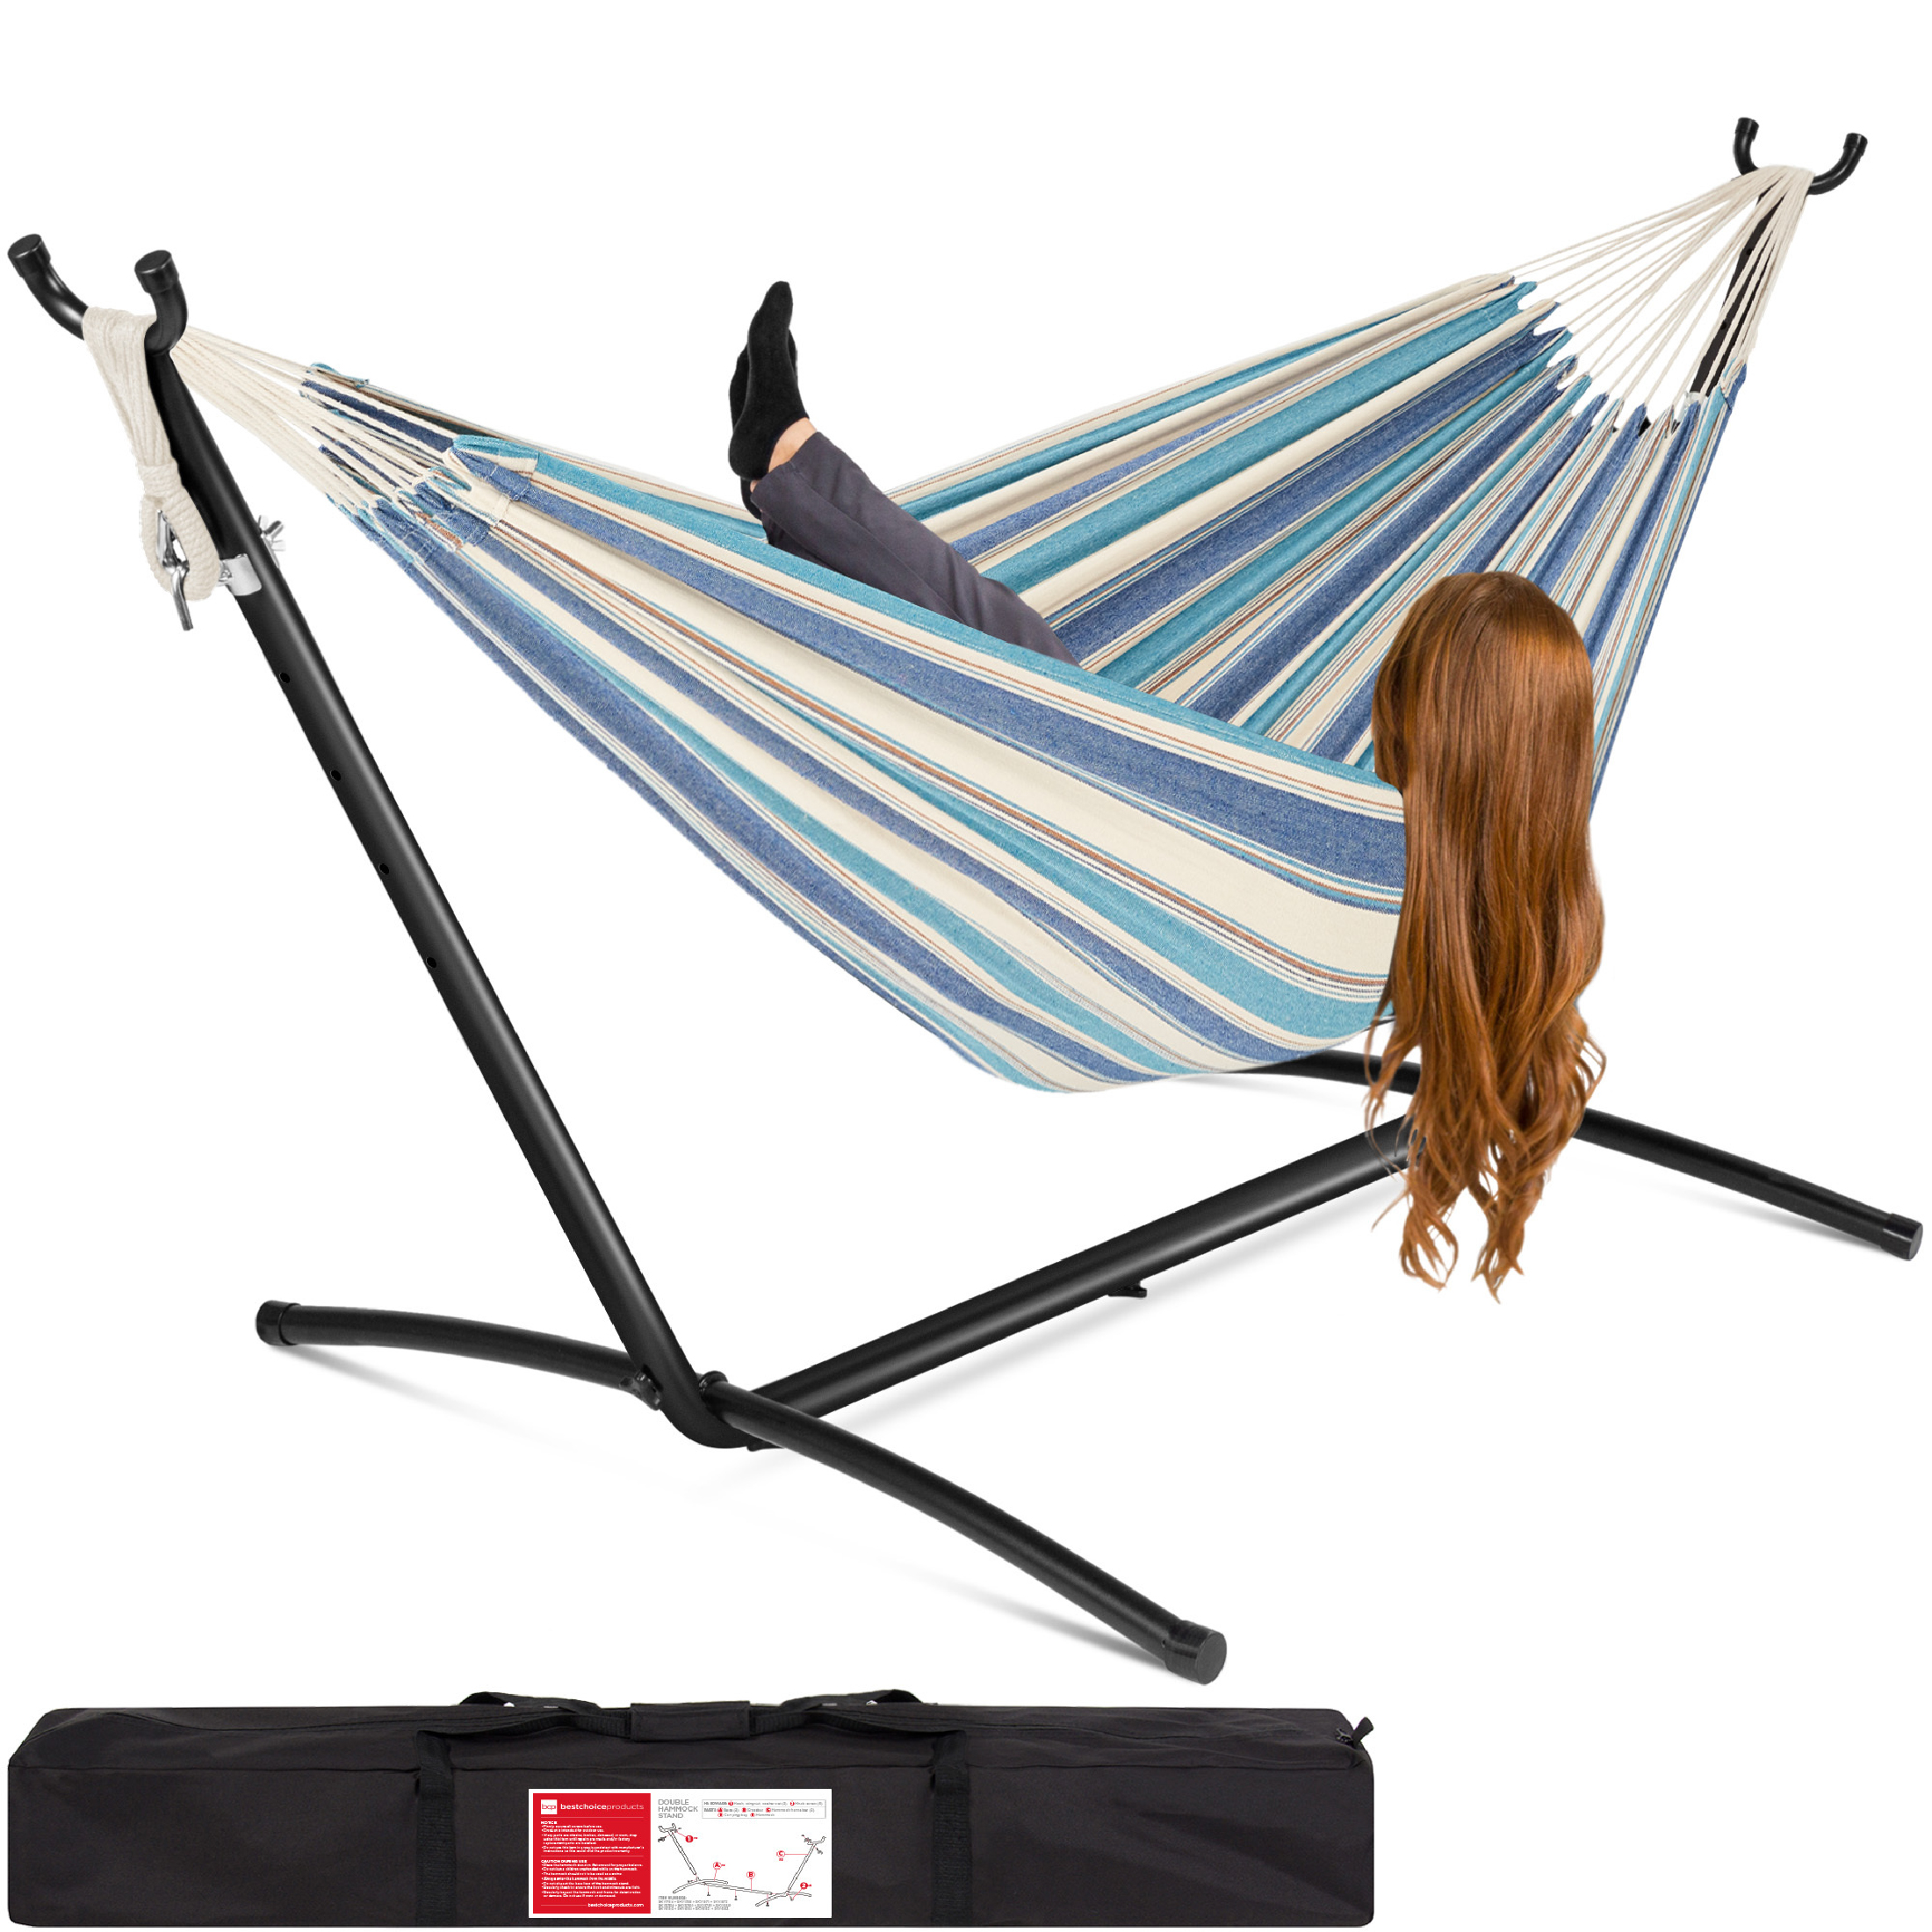 Best Choice Products 2-Person Brazilian-Style Cotton Double Hammock with Stand Set w/ Carrying Bag - Ocean - image 1 of 7